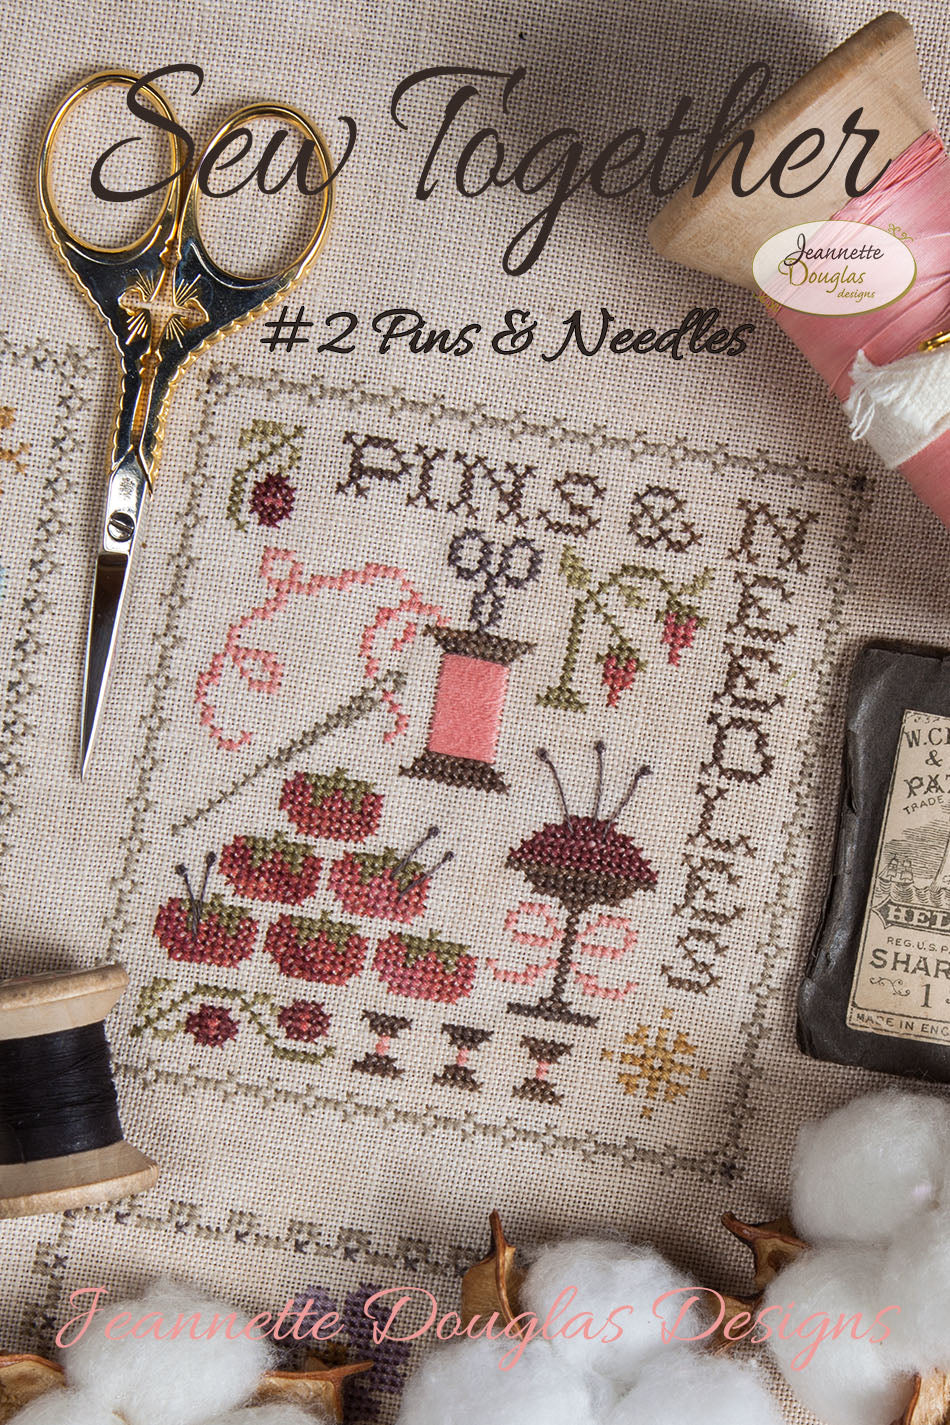 Sew Together Series | #2 Pins & Needles